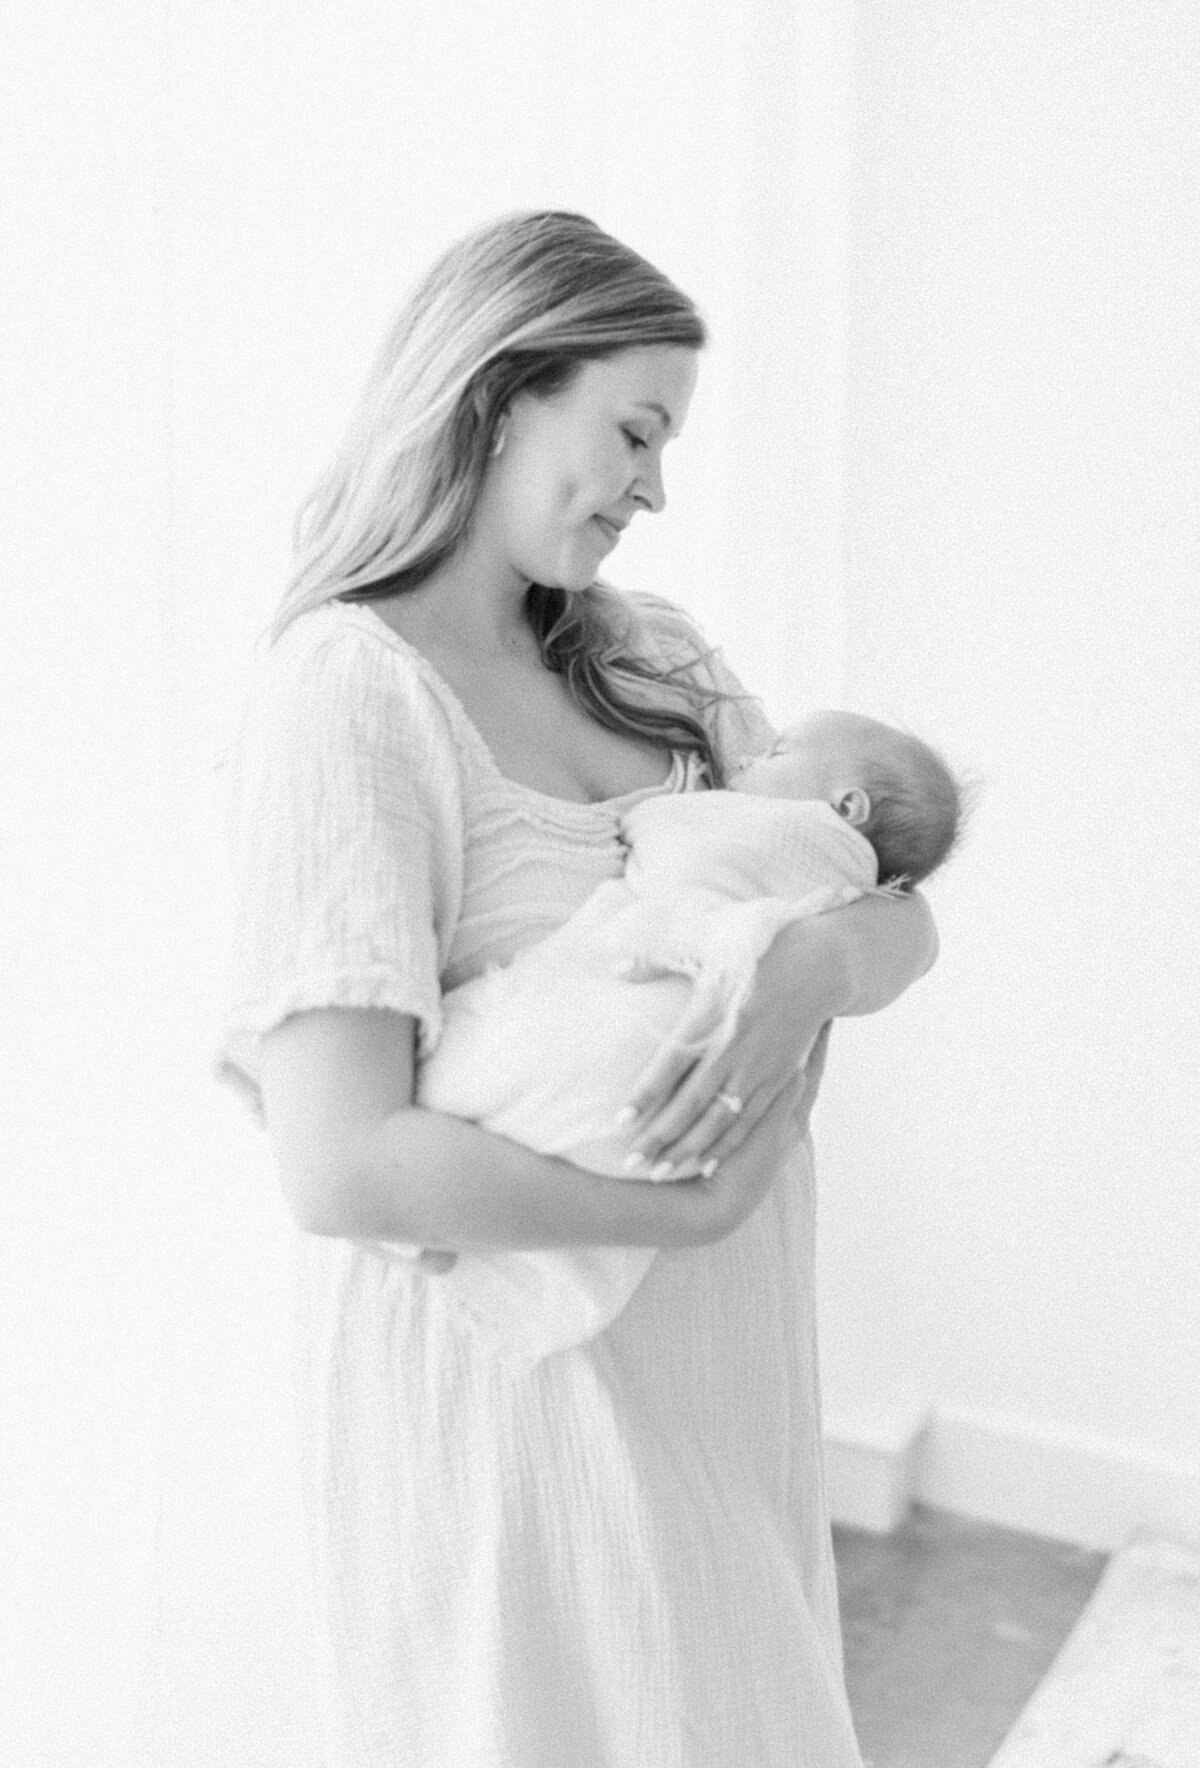 Black and white portrait of a woman holding a swaddled baby in her arms